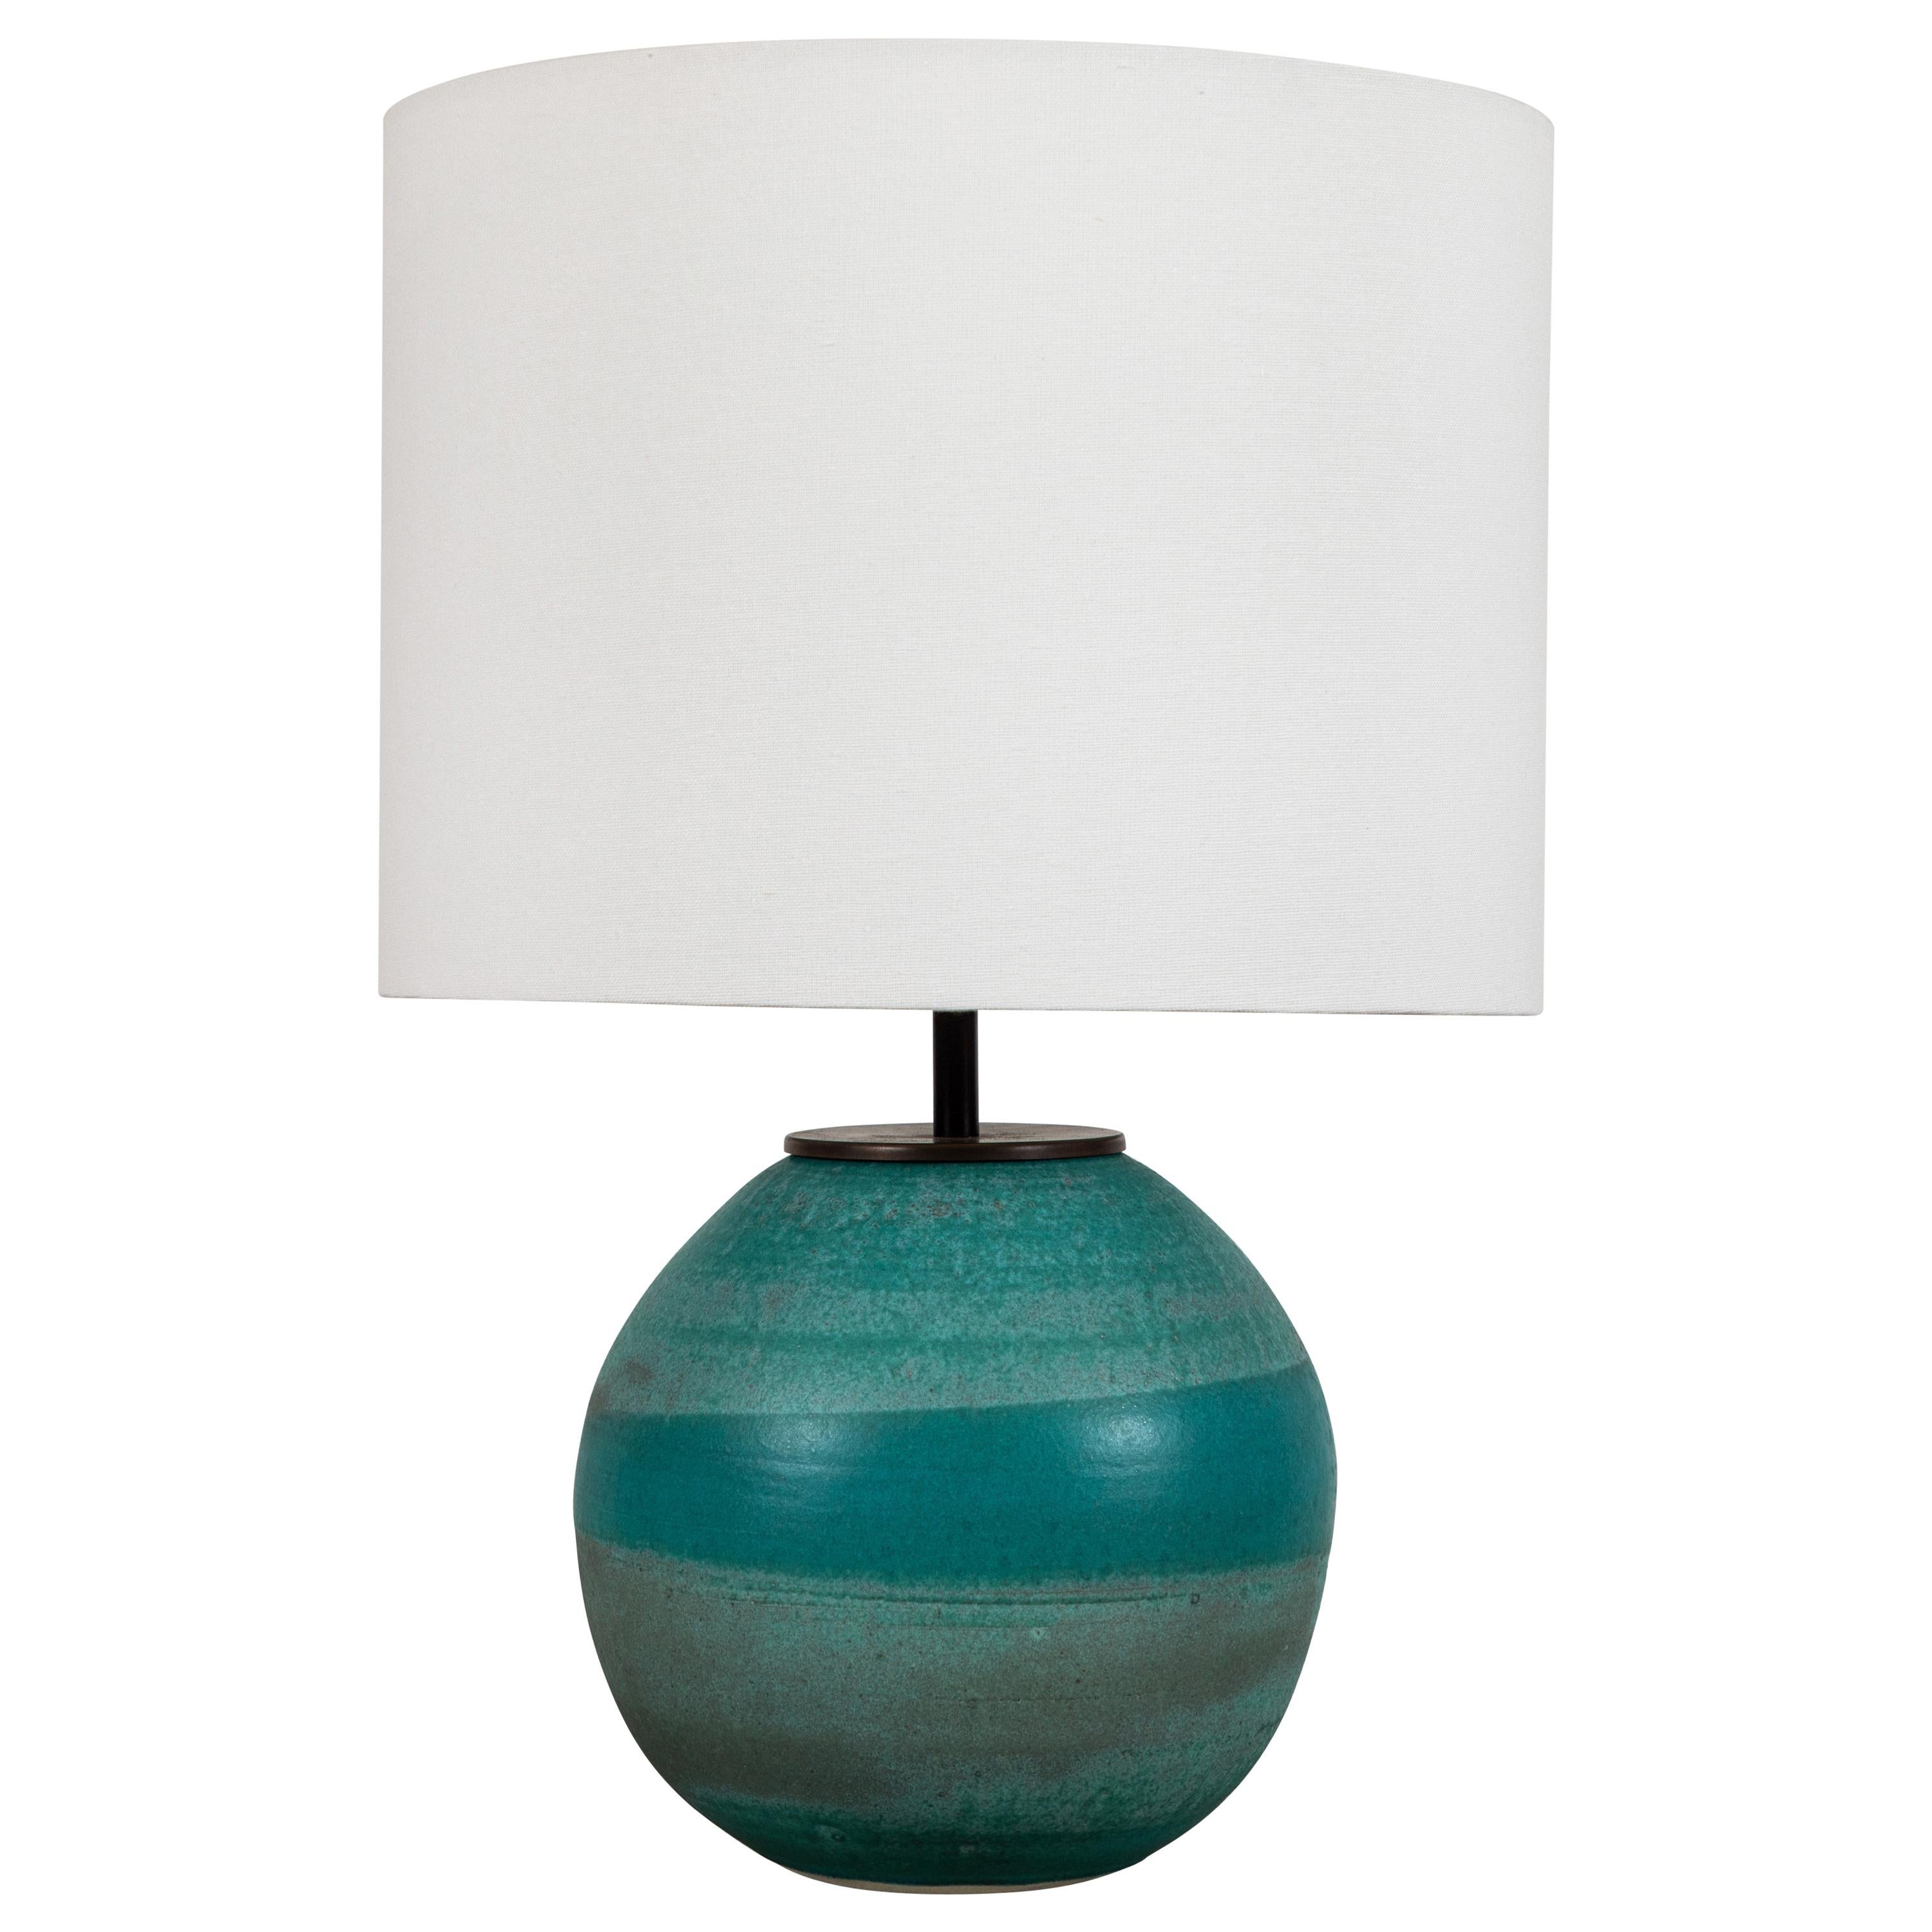 Turquoise Ceramic Lamp by Victoria Morris for Lawson-Fenning